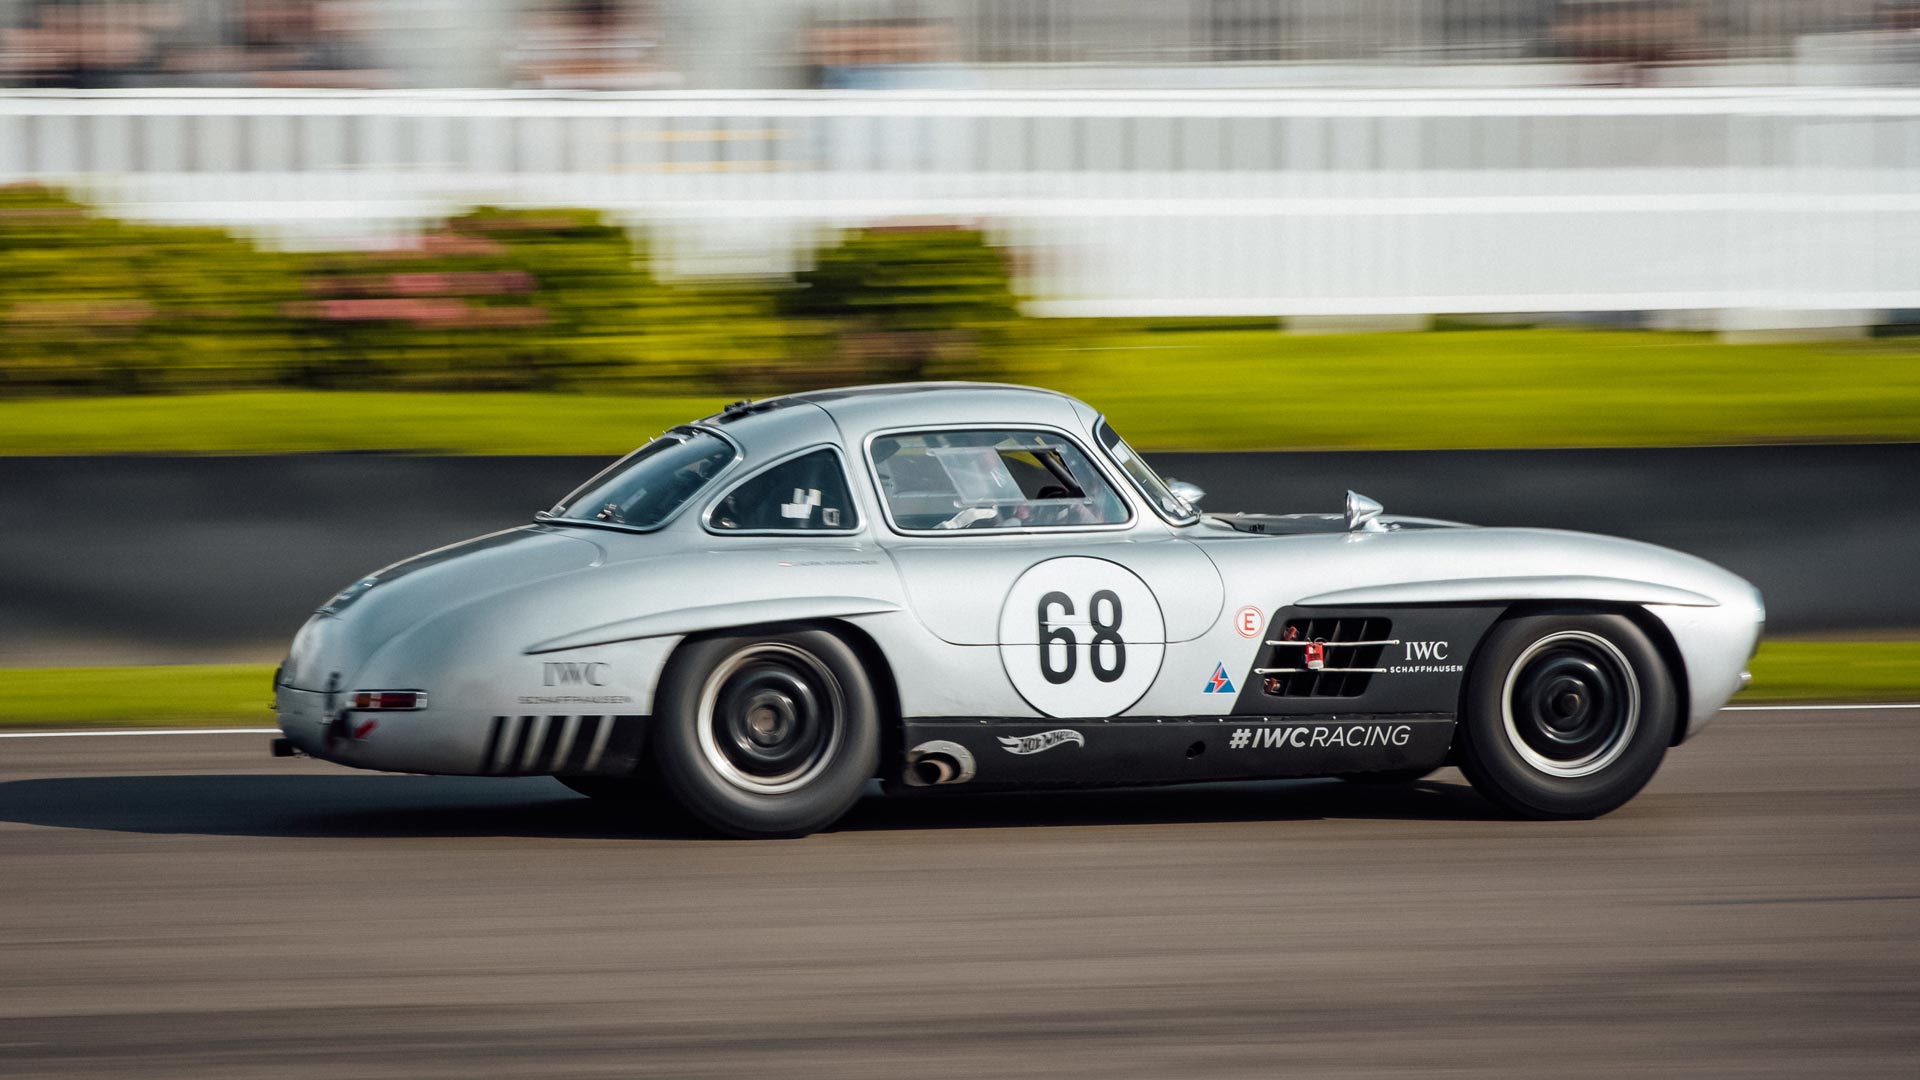 THE IWC RACING TEAM MAKES ITS COMEBACK ON THE GOODWOOD MOTOR CIRCUIT